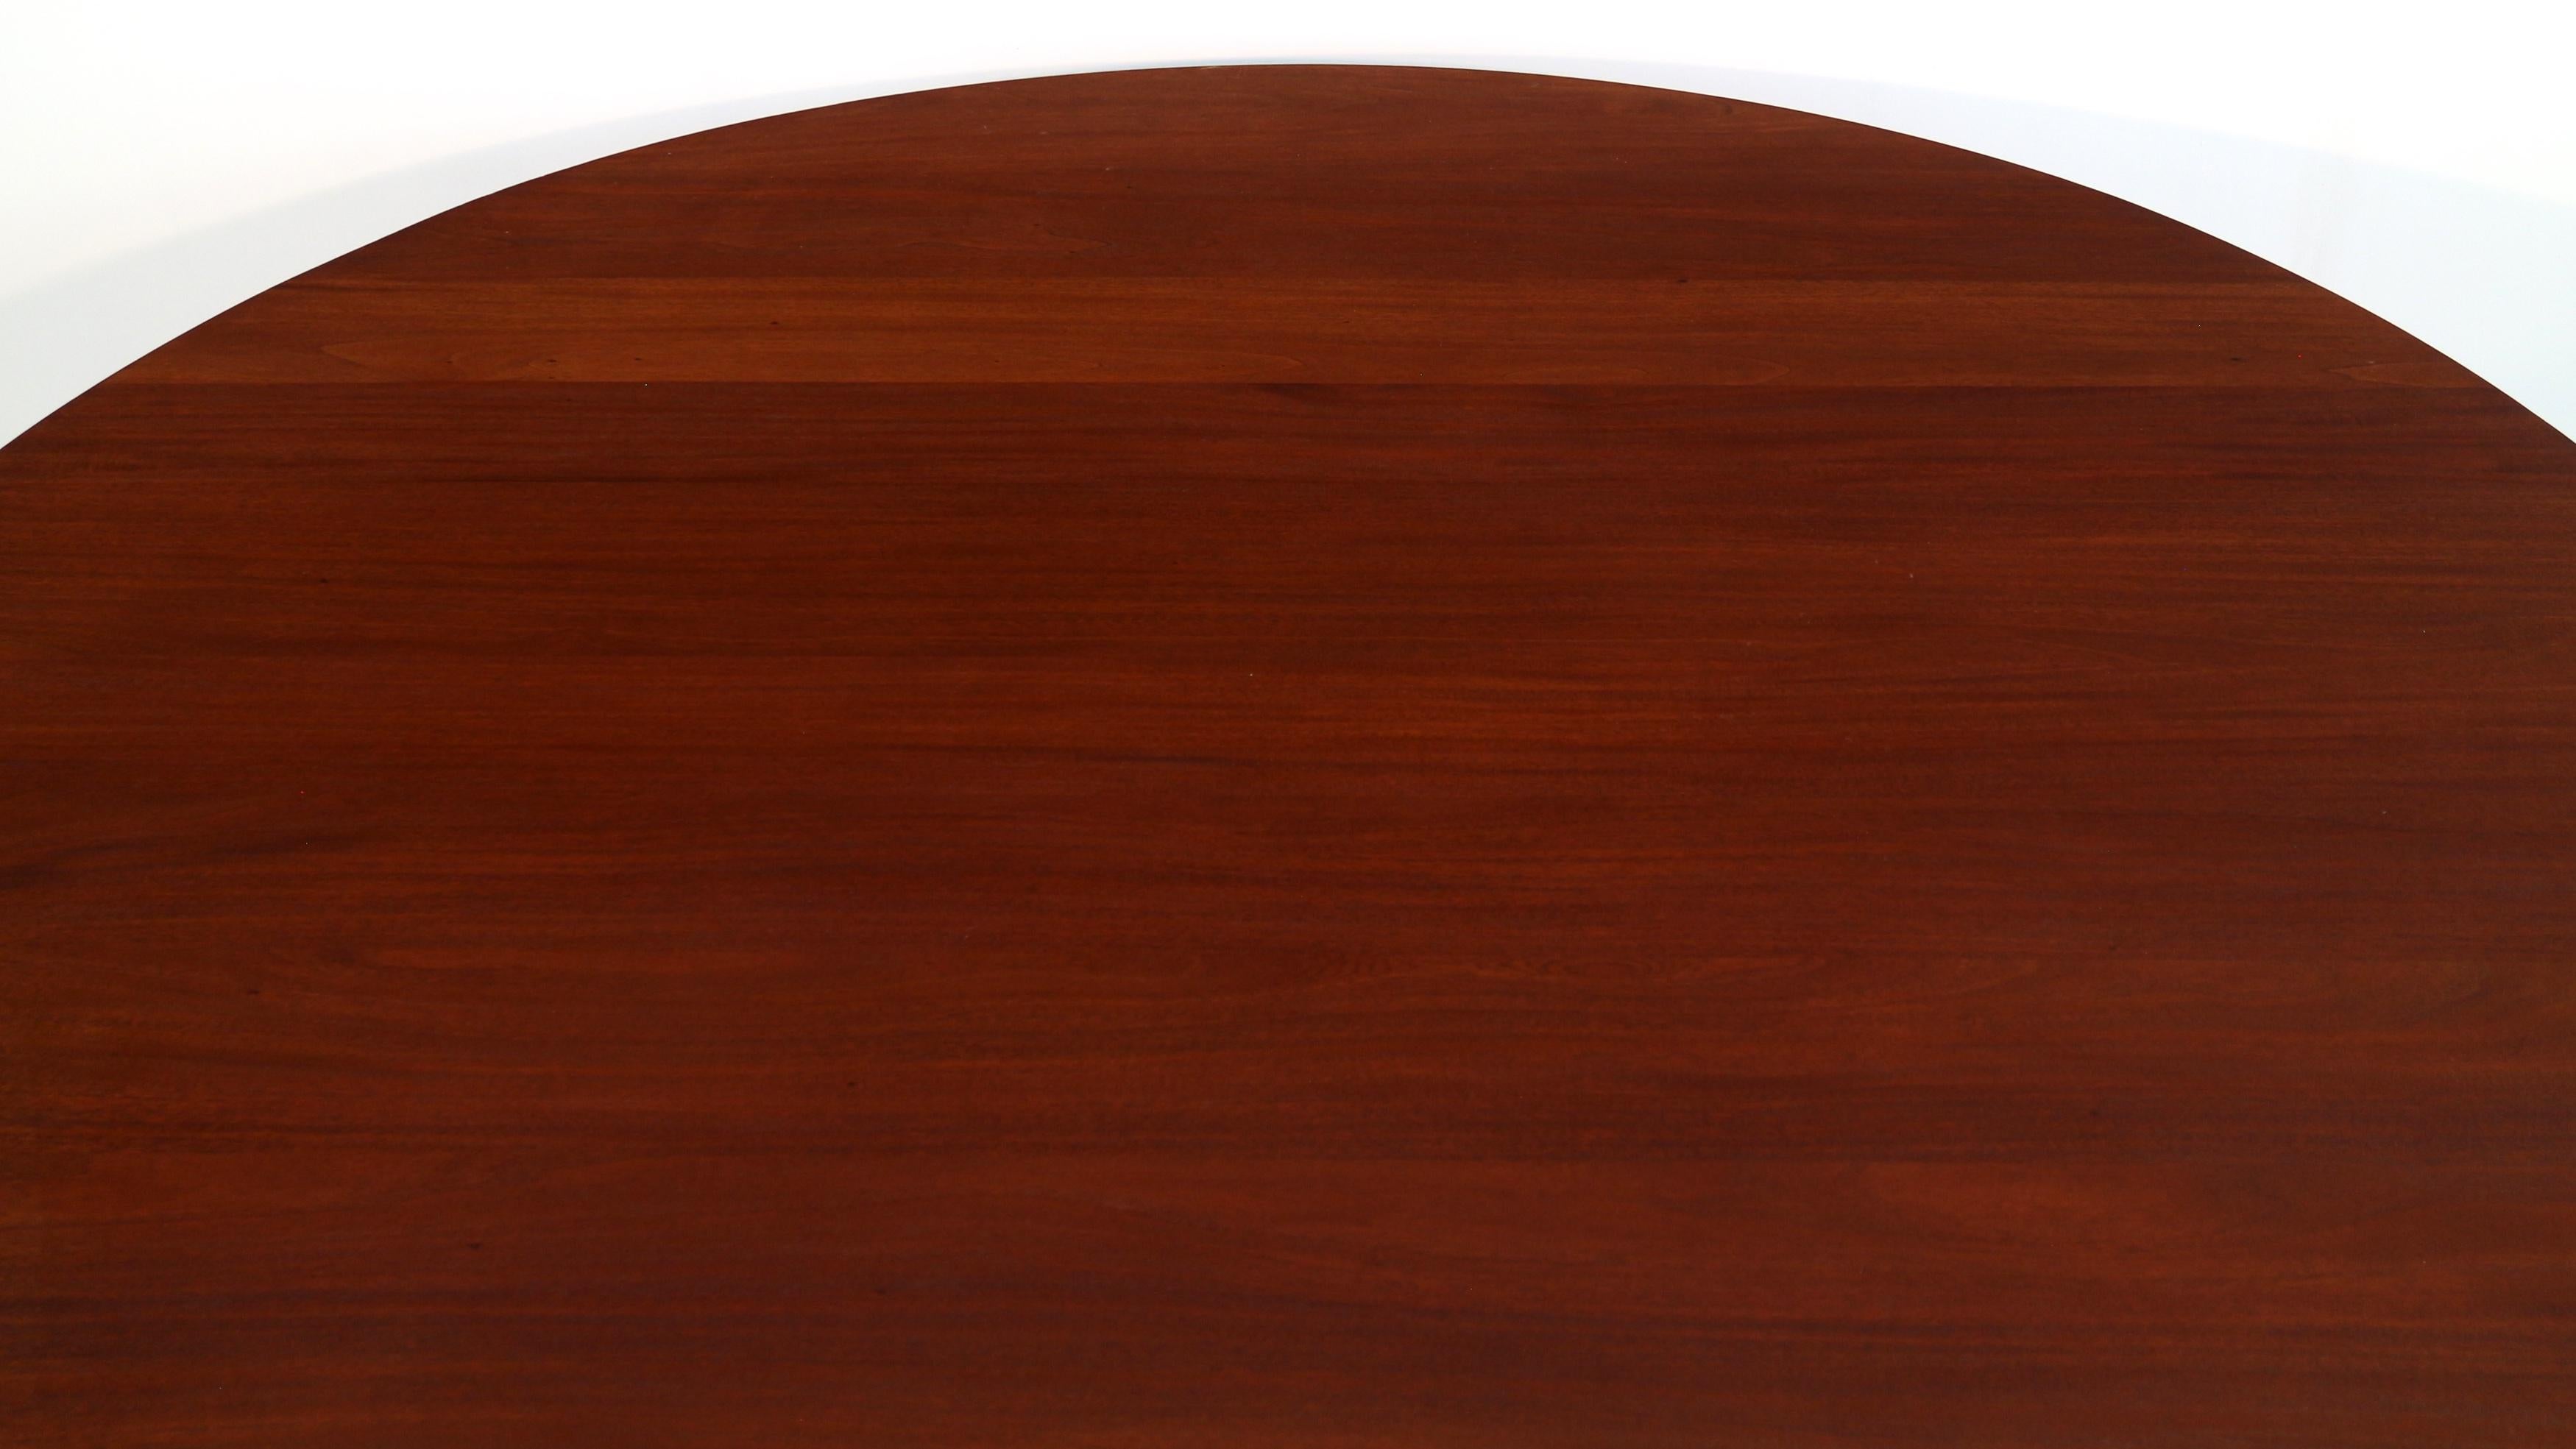 Large Victorian Style Mahogany Circular Centre Table - 6ft7 / 2m diameter For Sale 2